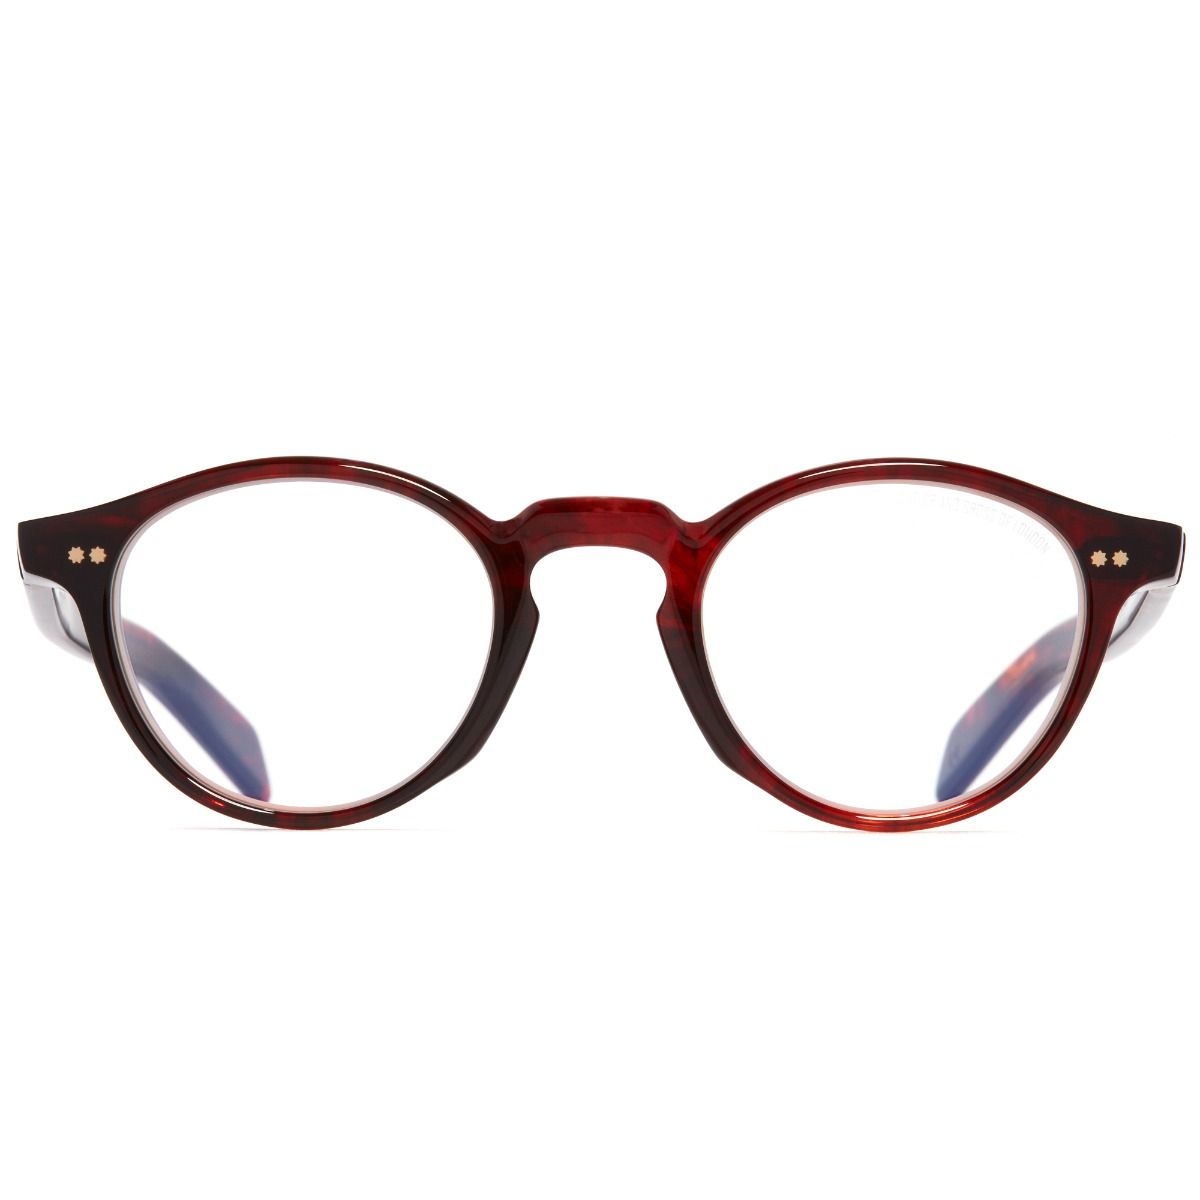 GR04 Round Optical Glasses - Red Havana by Cutler and Gross